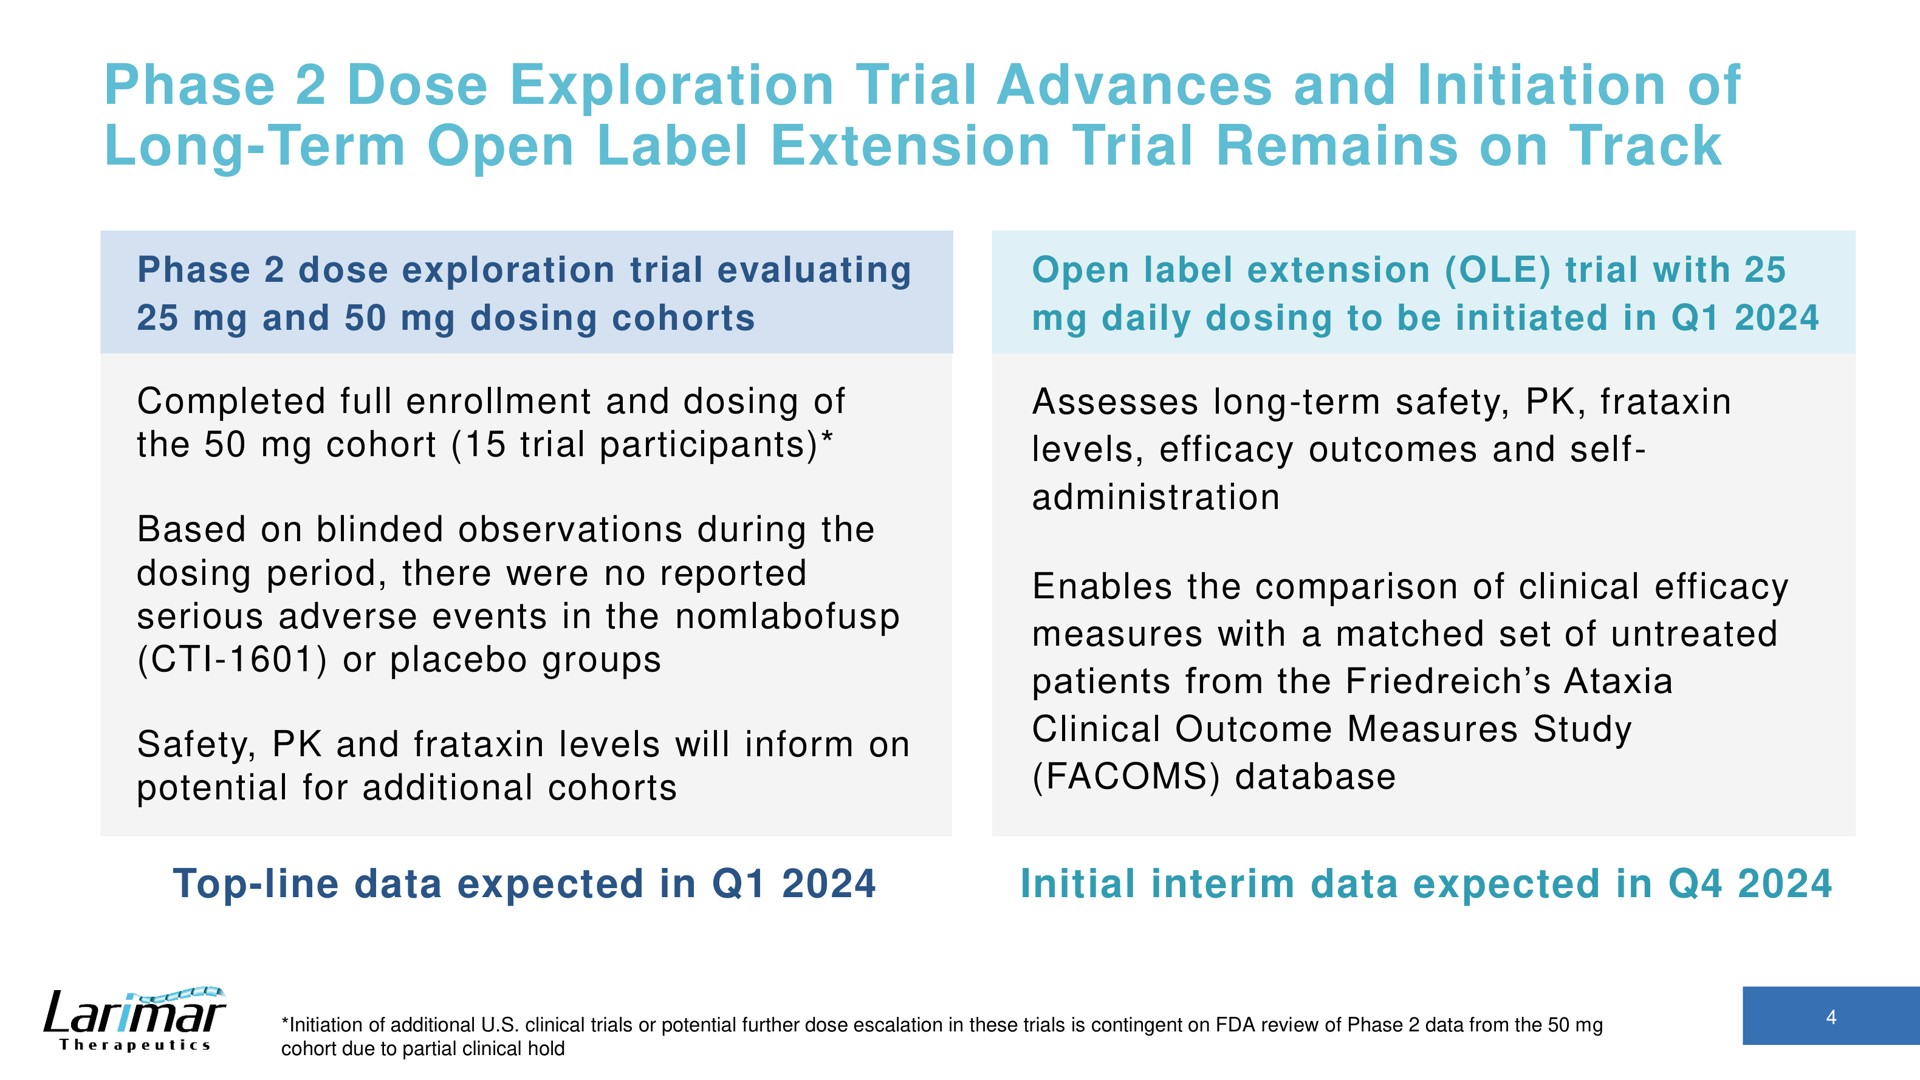 phase dose exploration trial advances and initiation of long term open label extension trial remains on track | Larimar Therapeutics